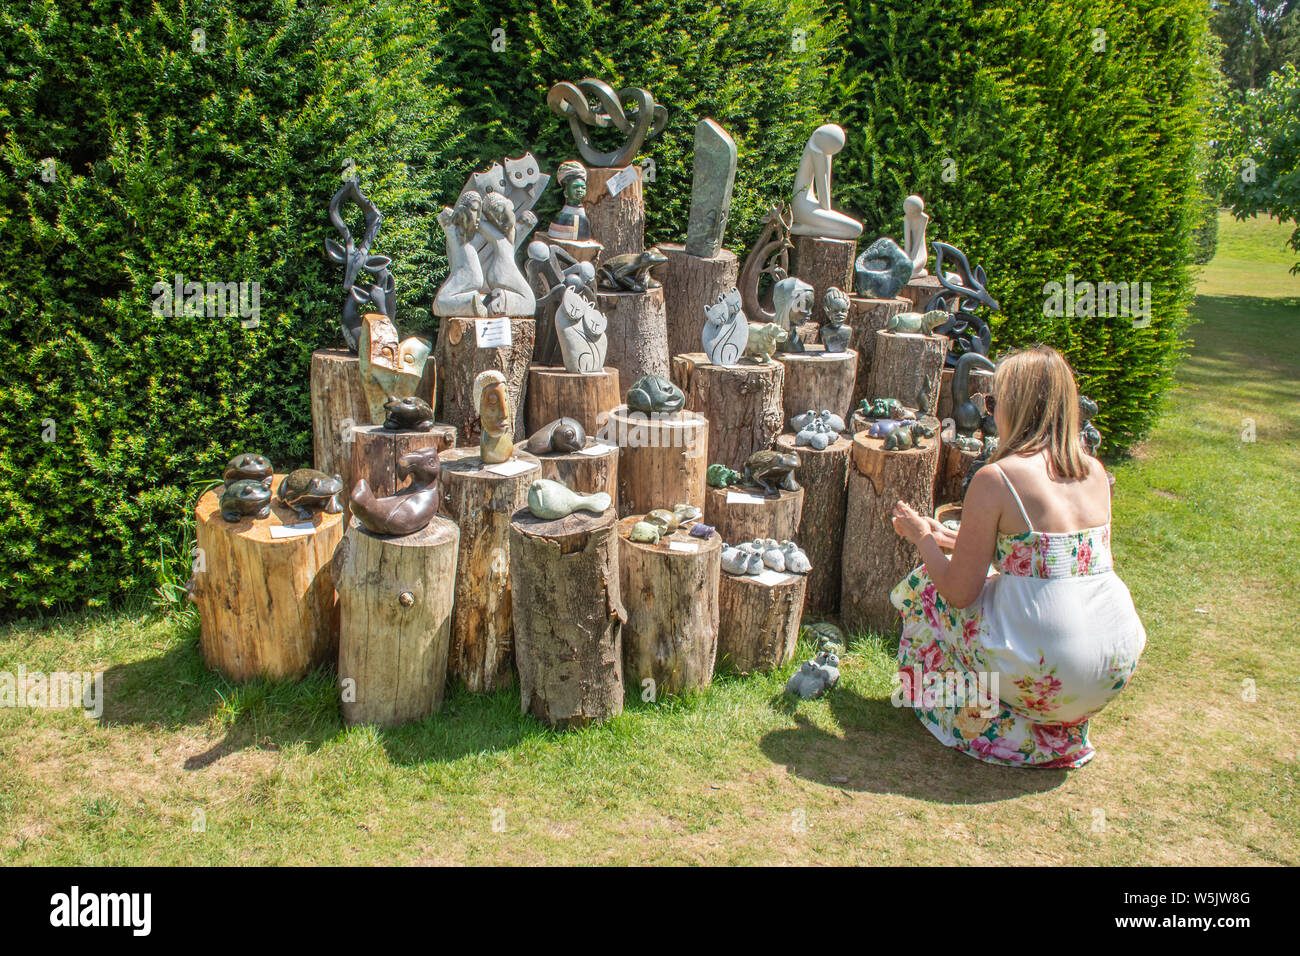 Display Of Garden Sculptures For Sale With A Woman Looking At Them